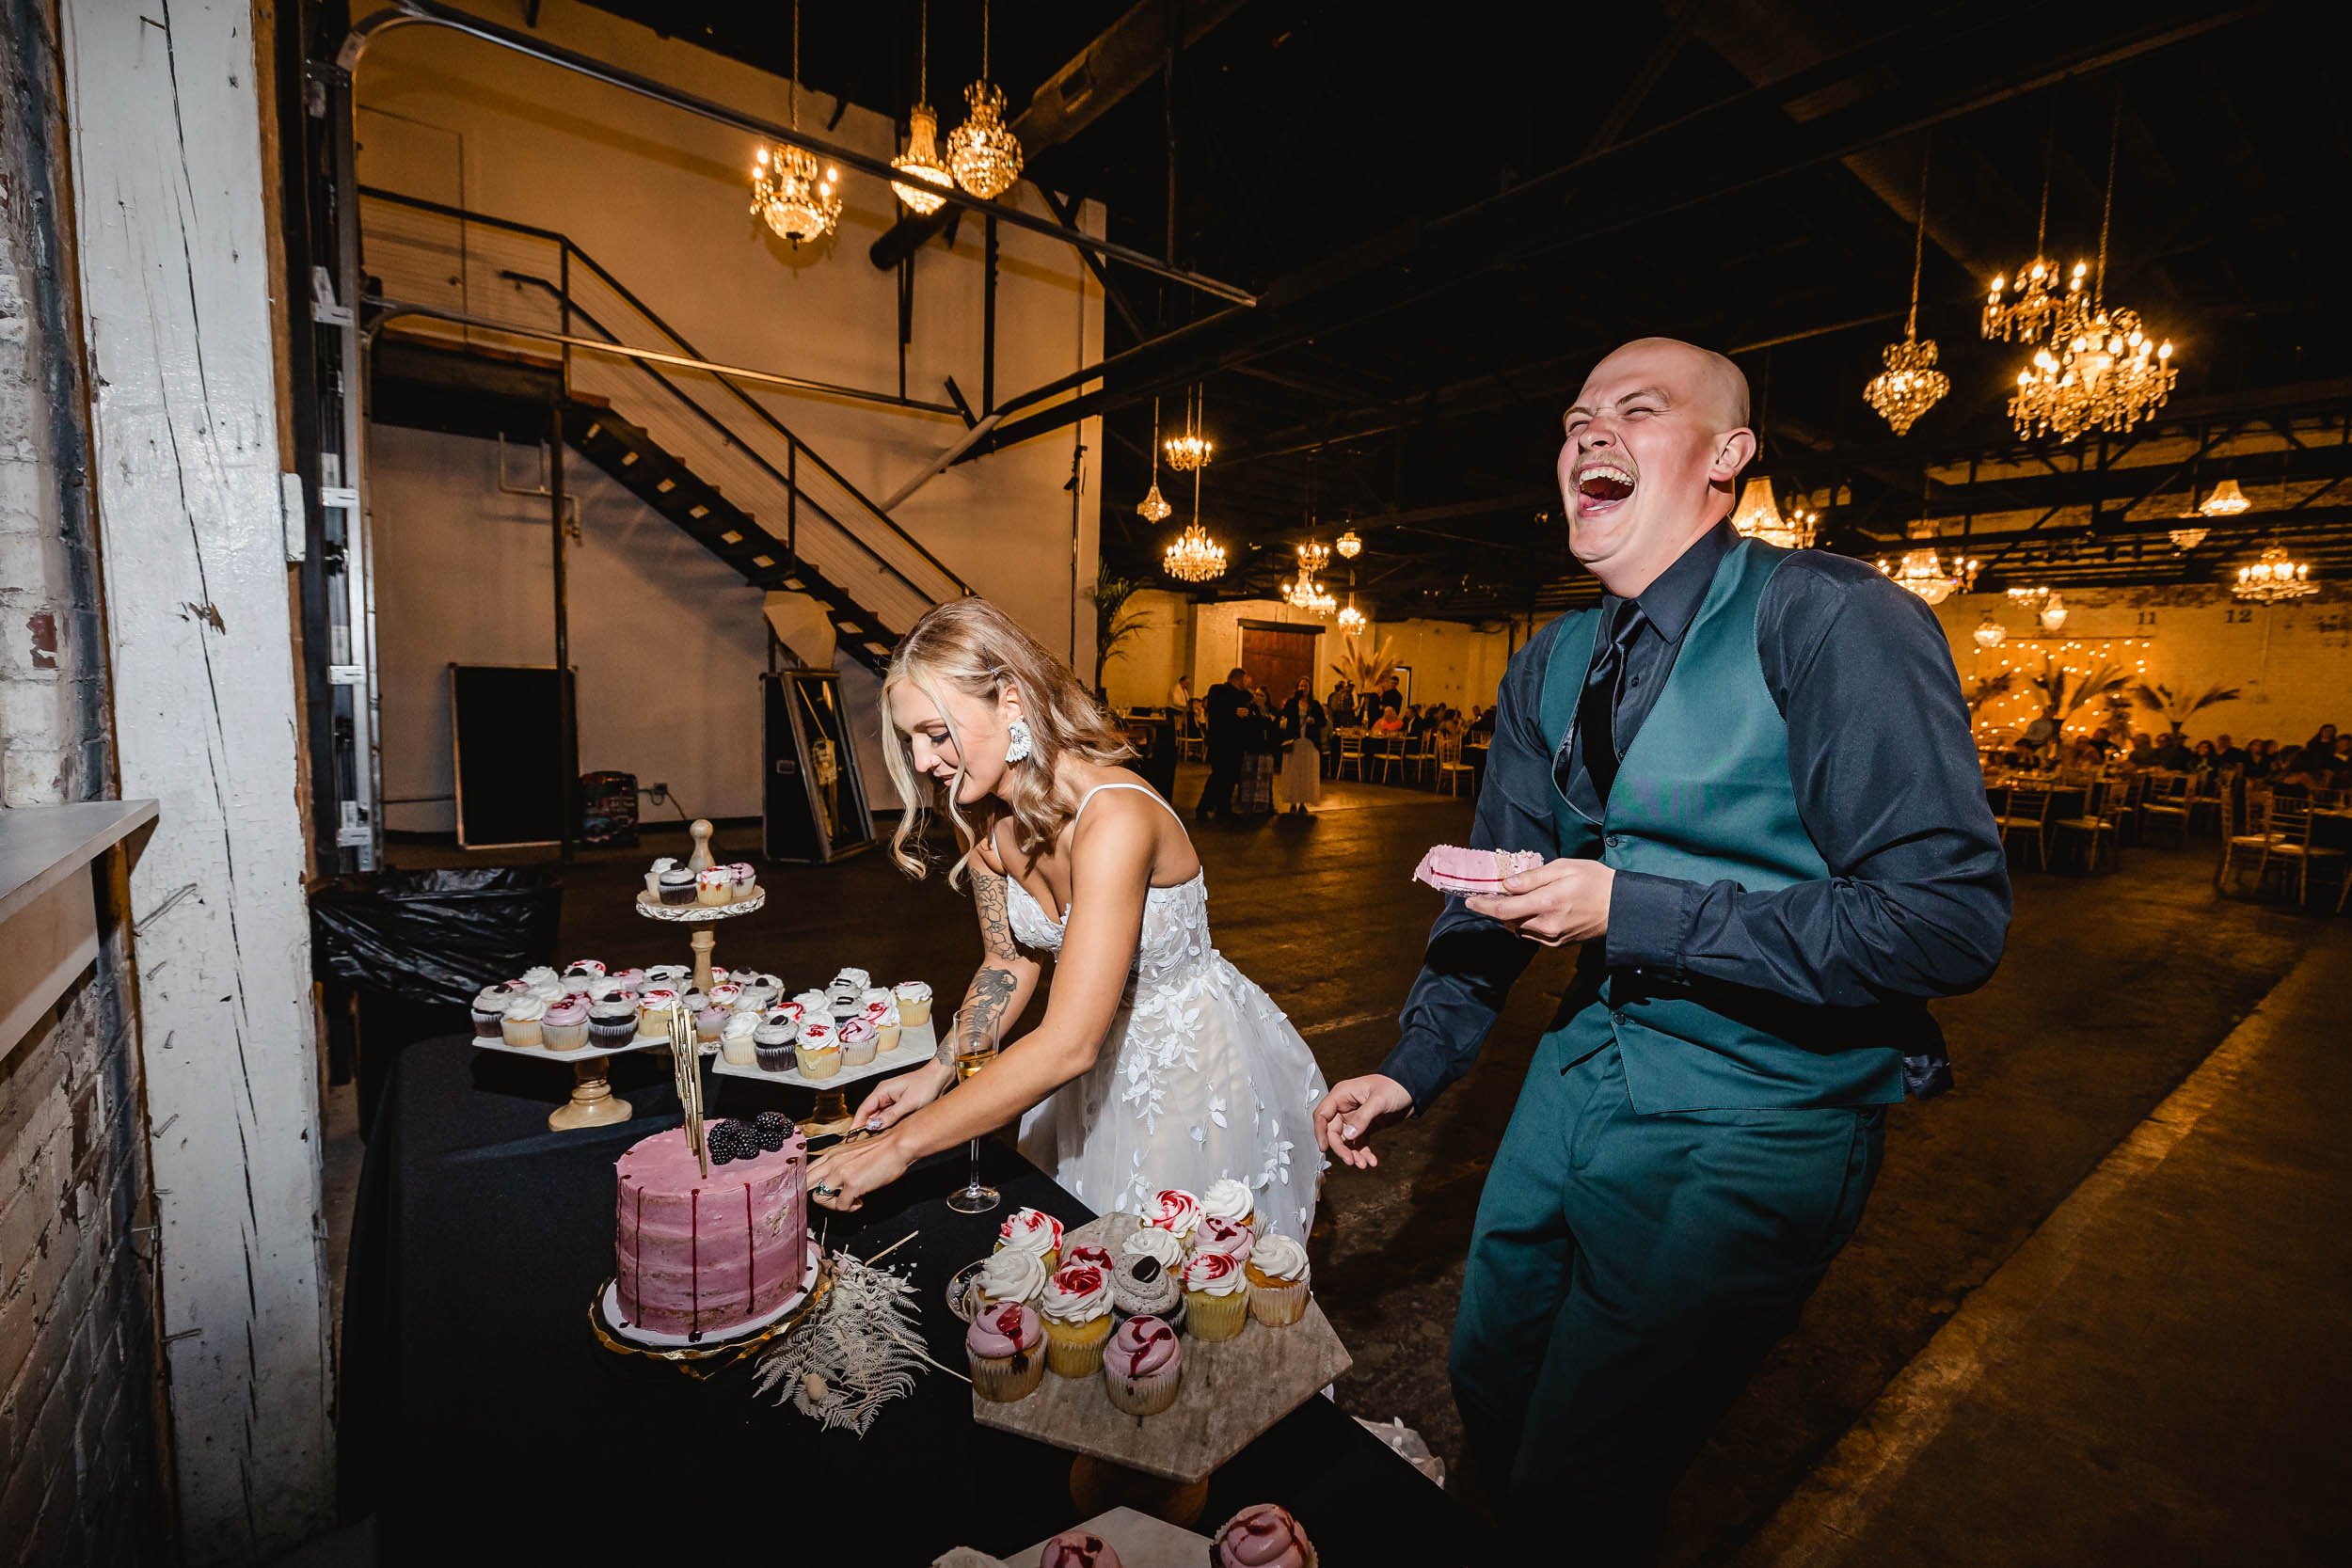 Groom laughing while bride cuts cake